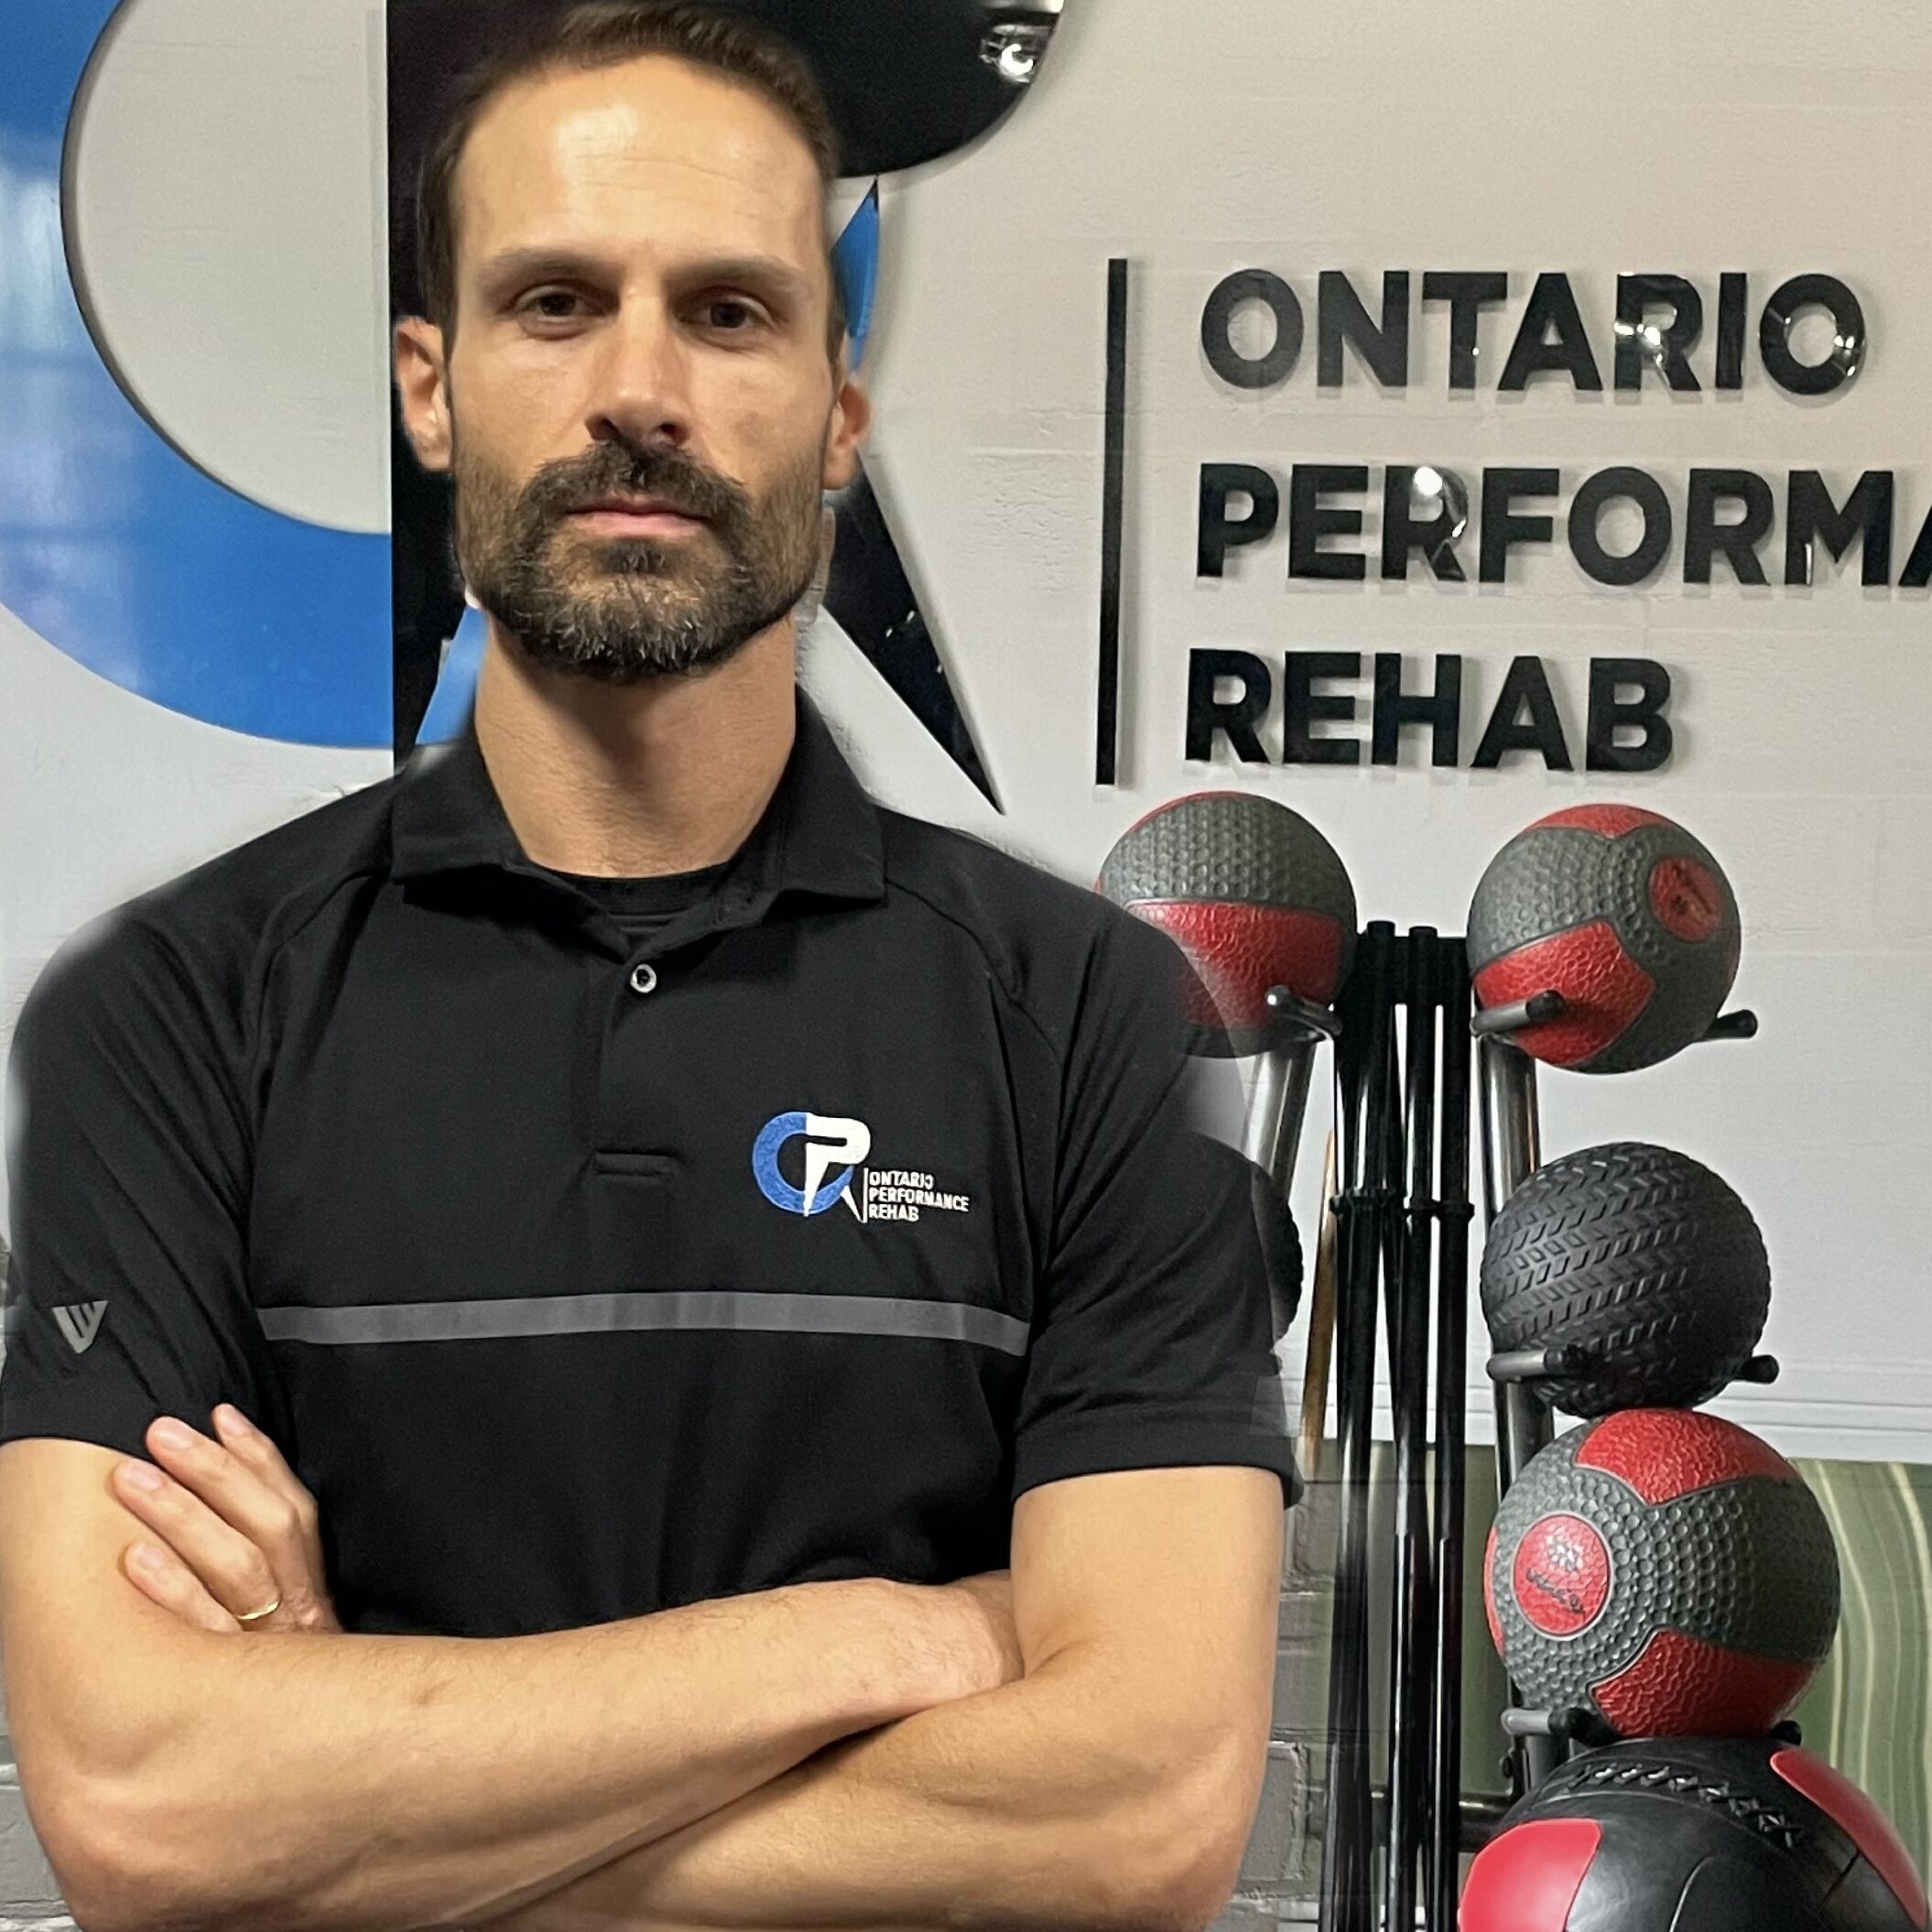 GUI PTA PHYSIOTHERAPY TRAINER AT ONTARIO PERFORMANCE REHAB